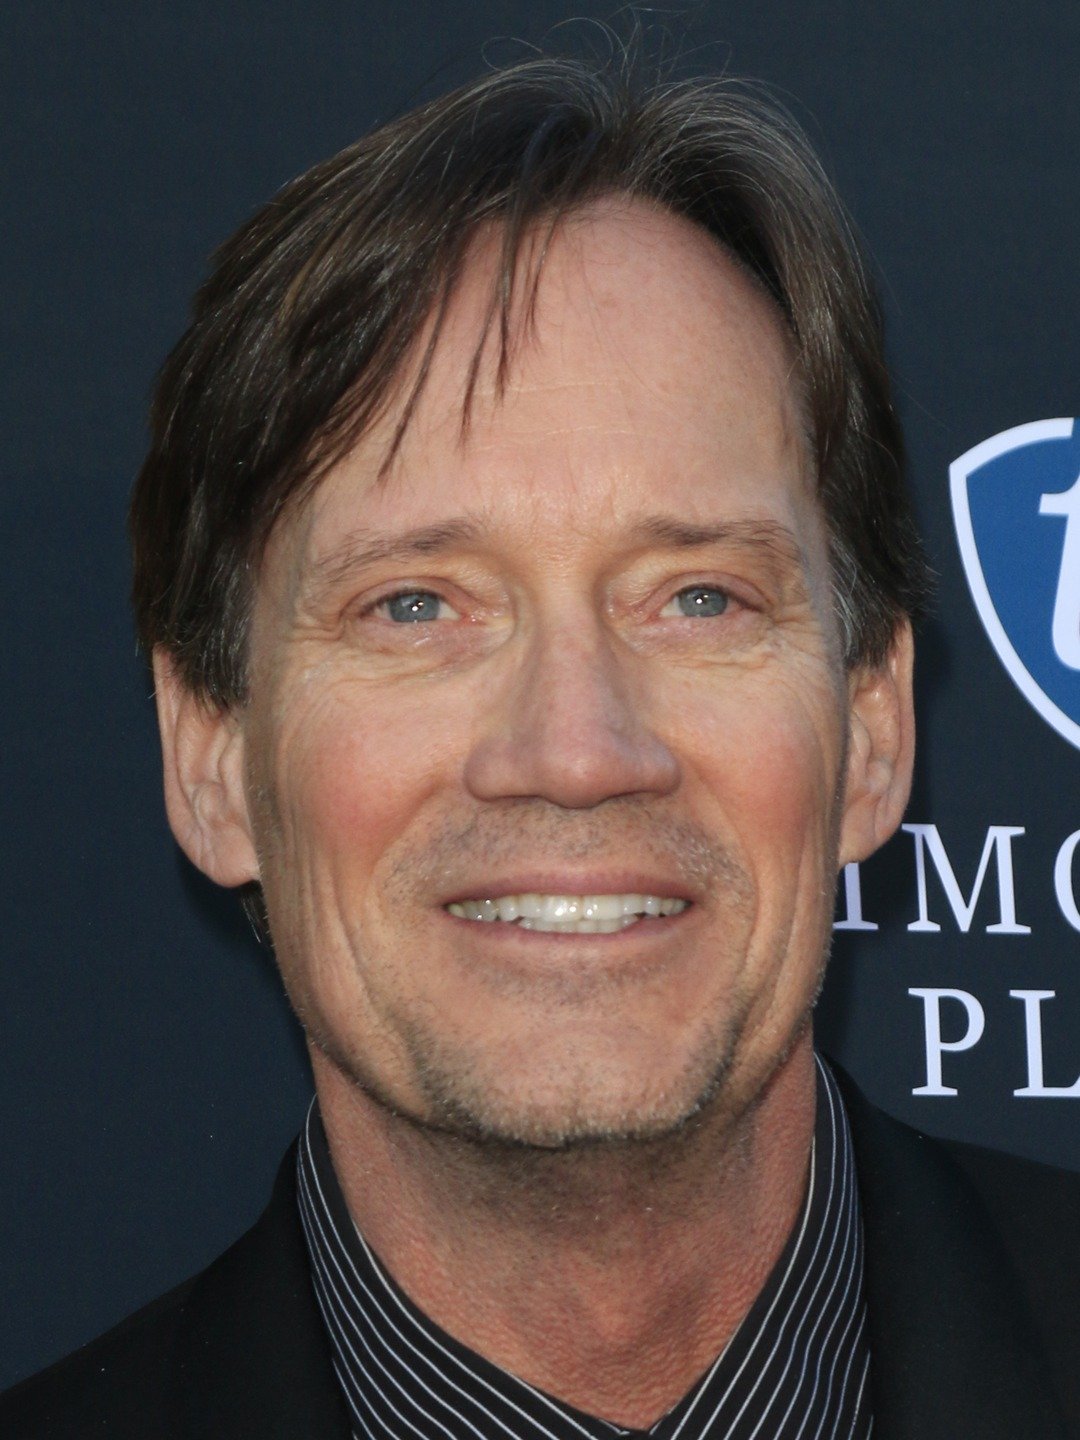 How tall is Kevin Sorbo?